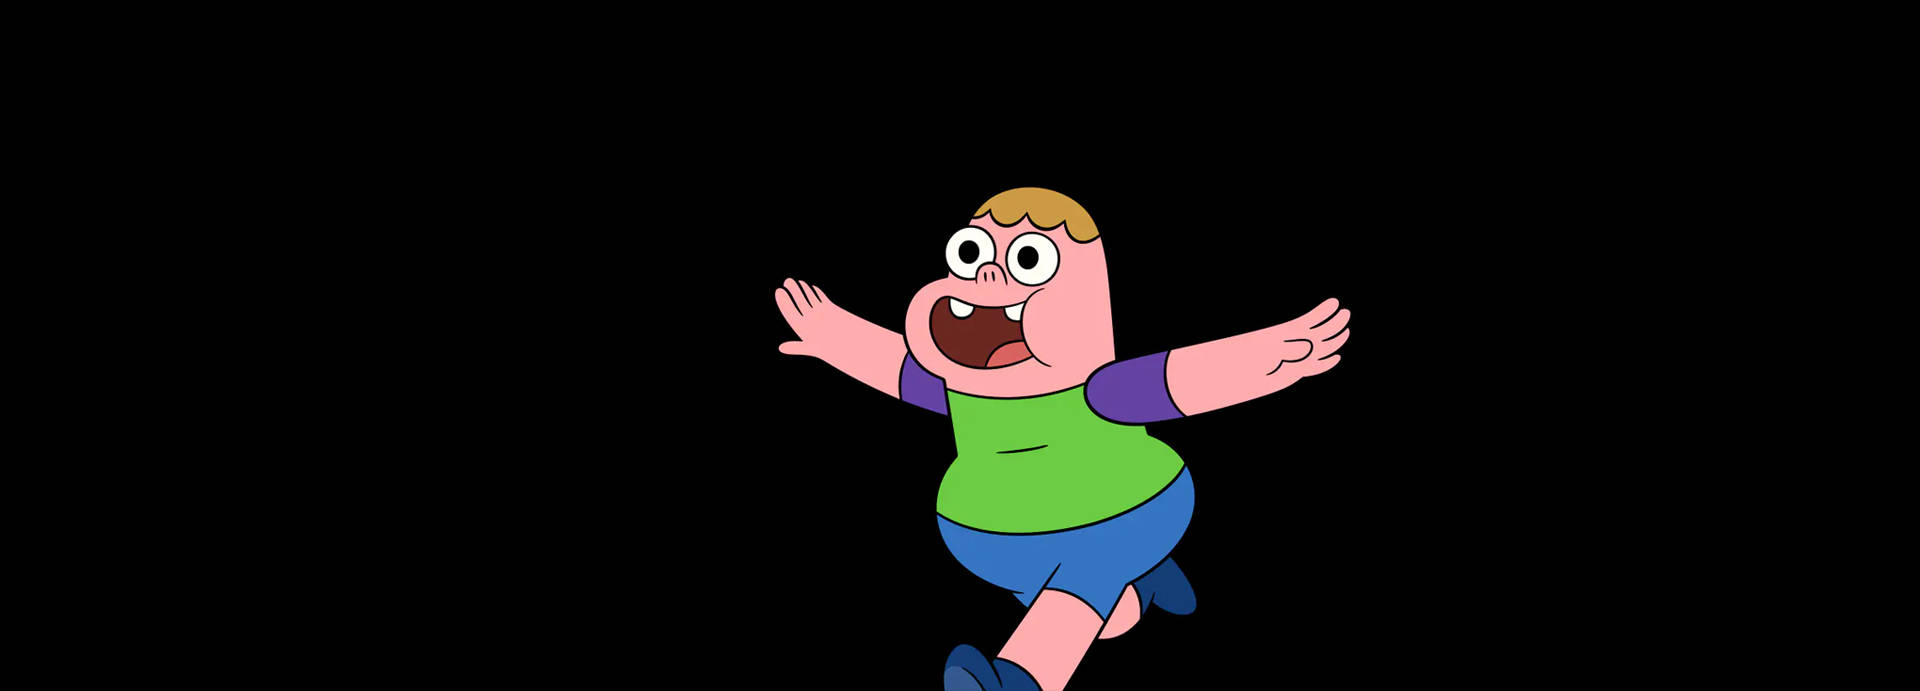 Clarence Running On White Background Background